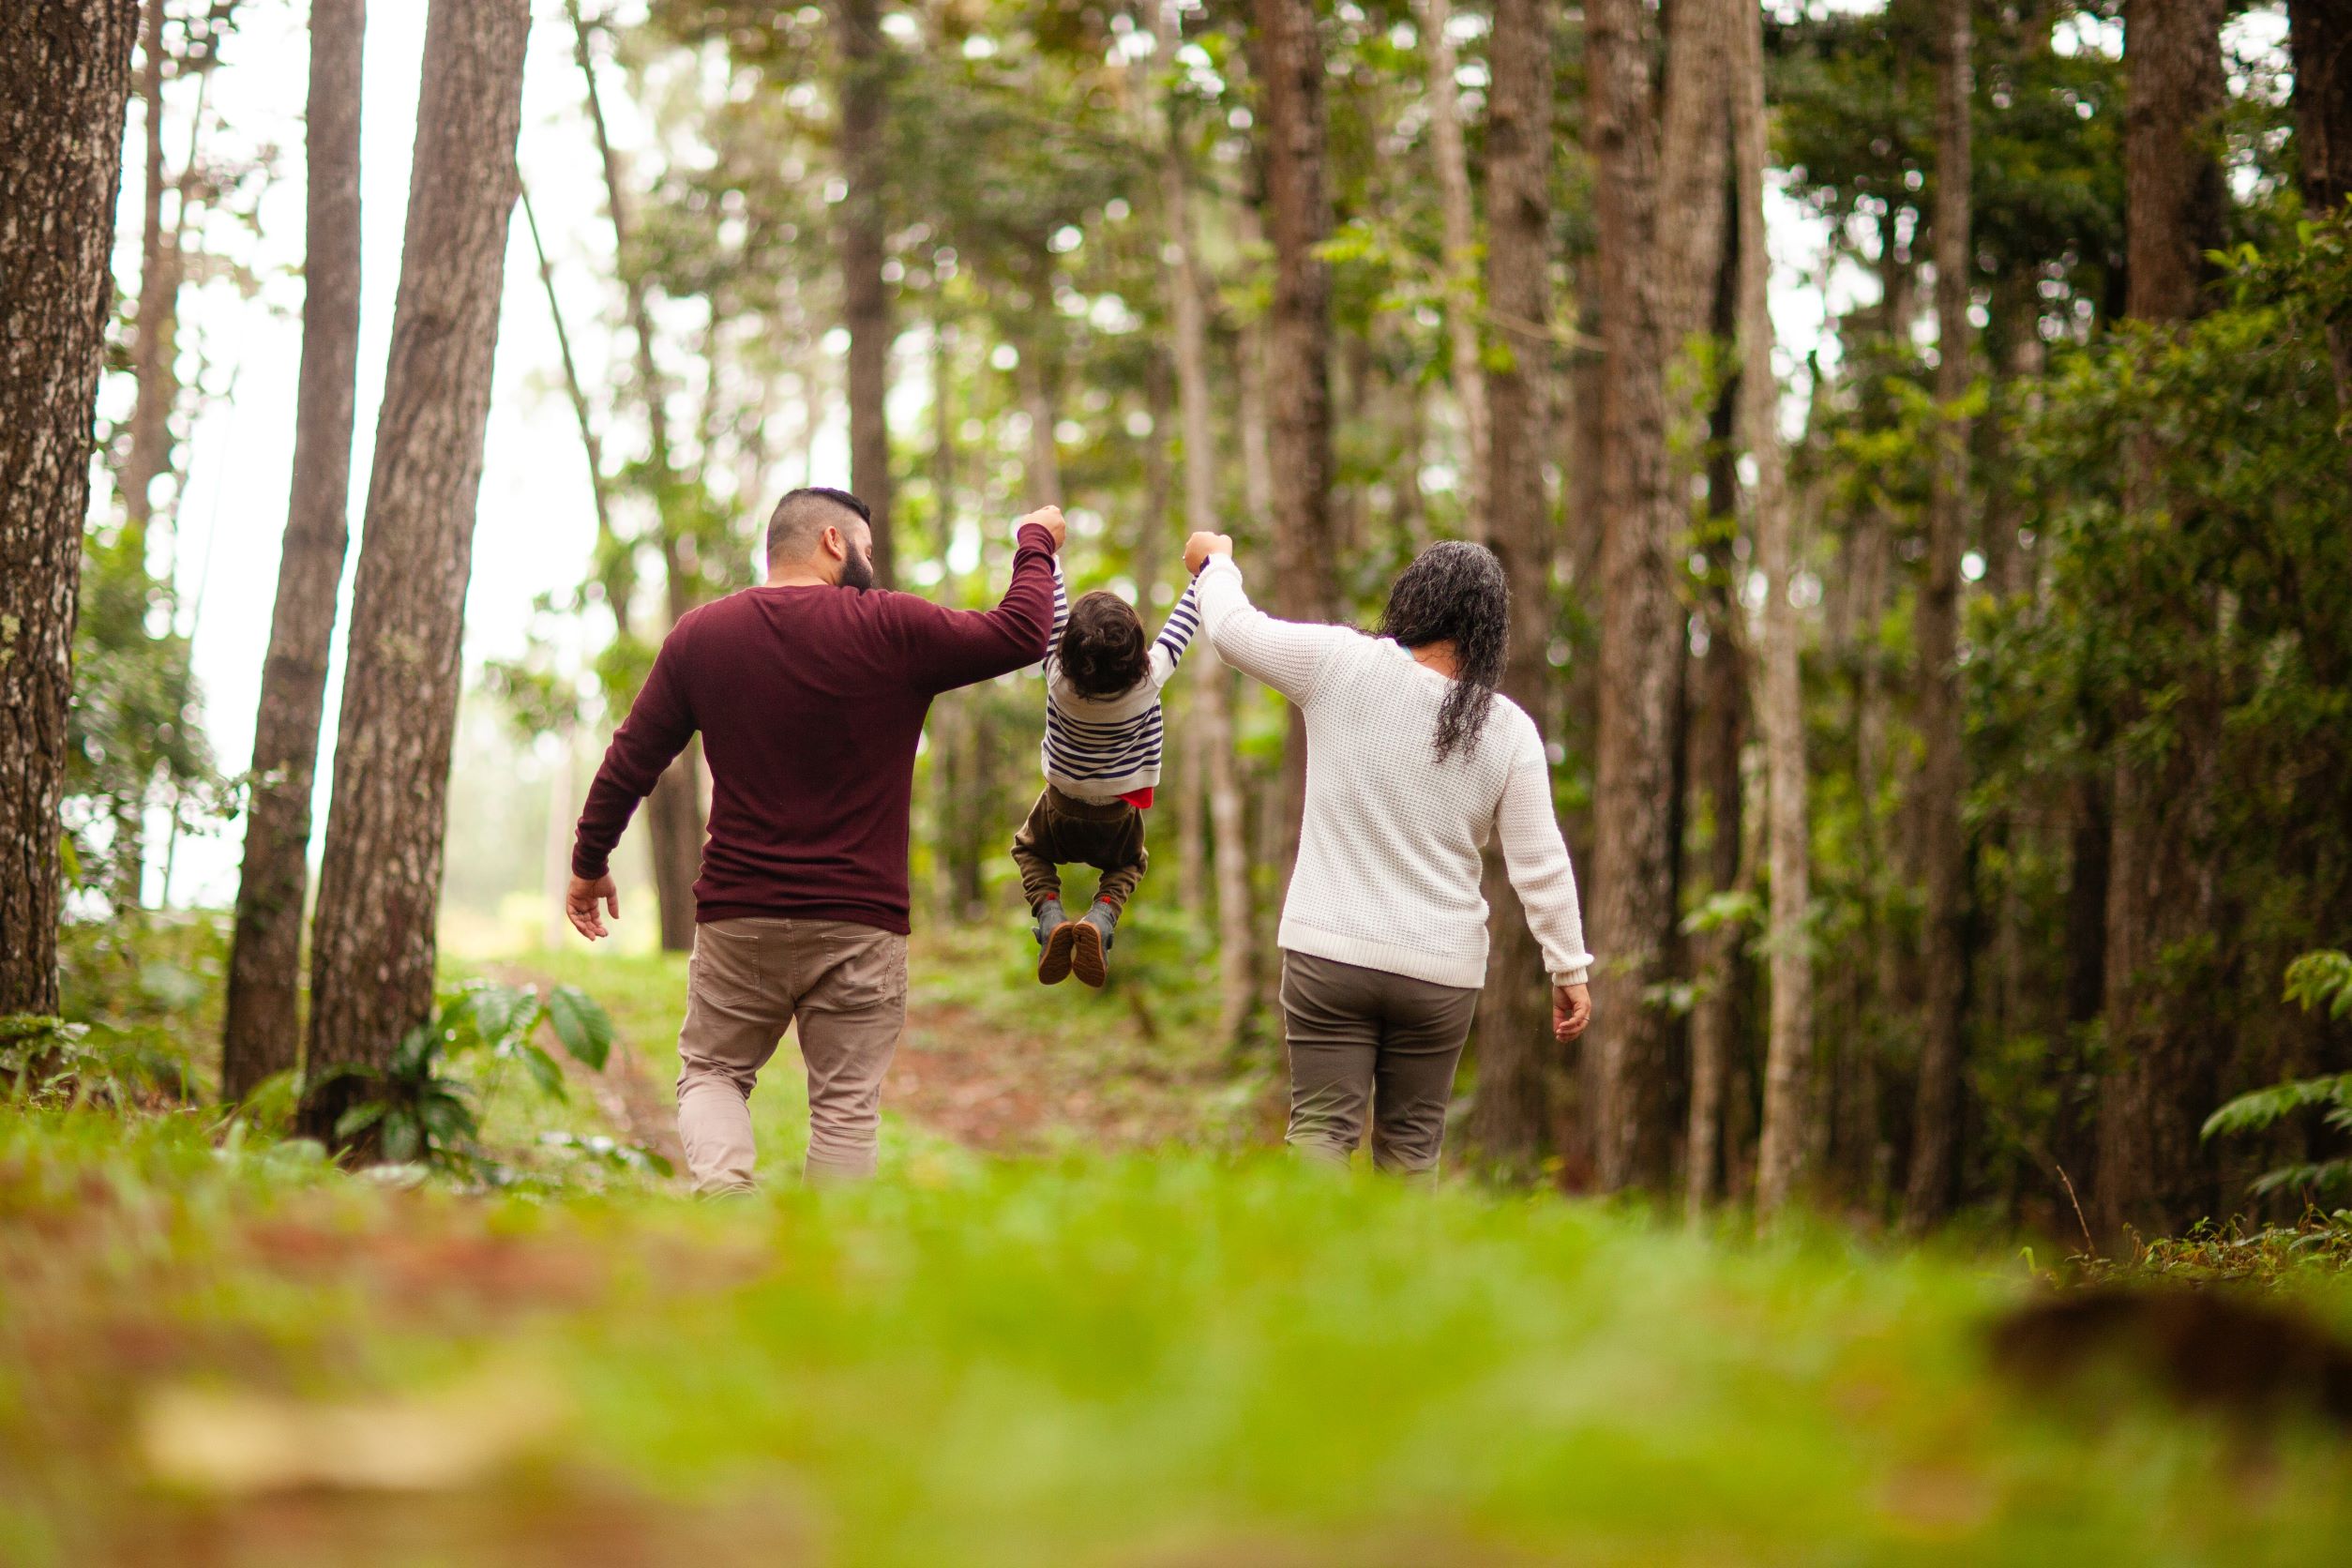 Affordable way to keep kids entertained this summer - Forest walks with the family